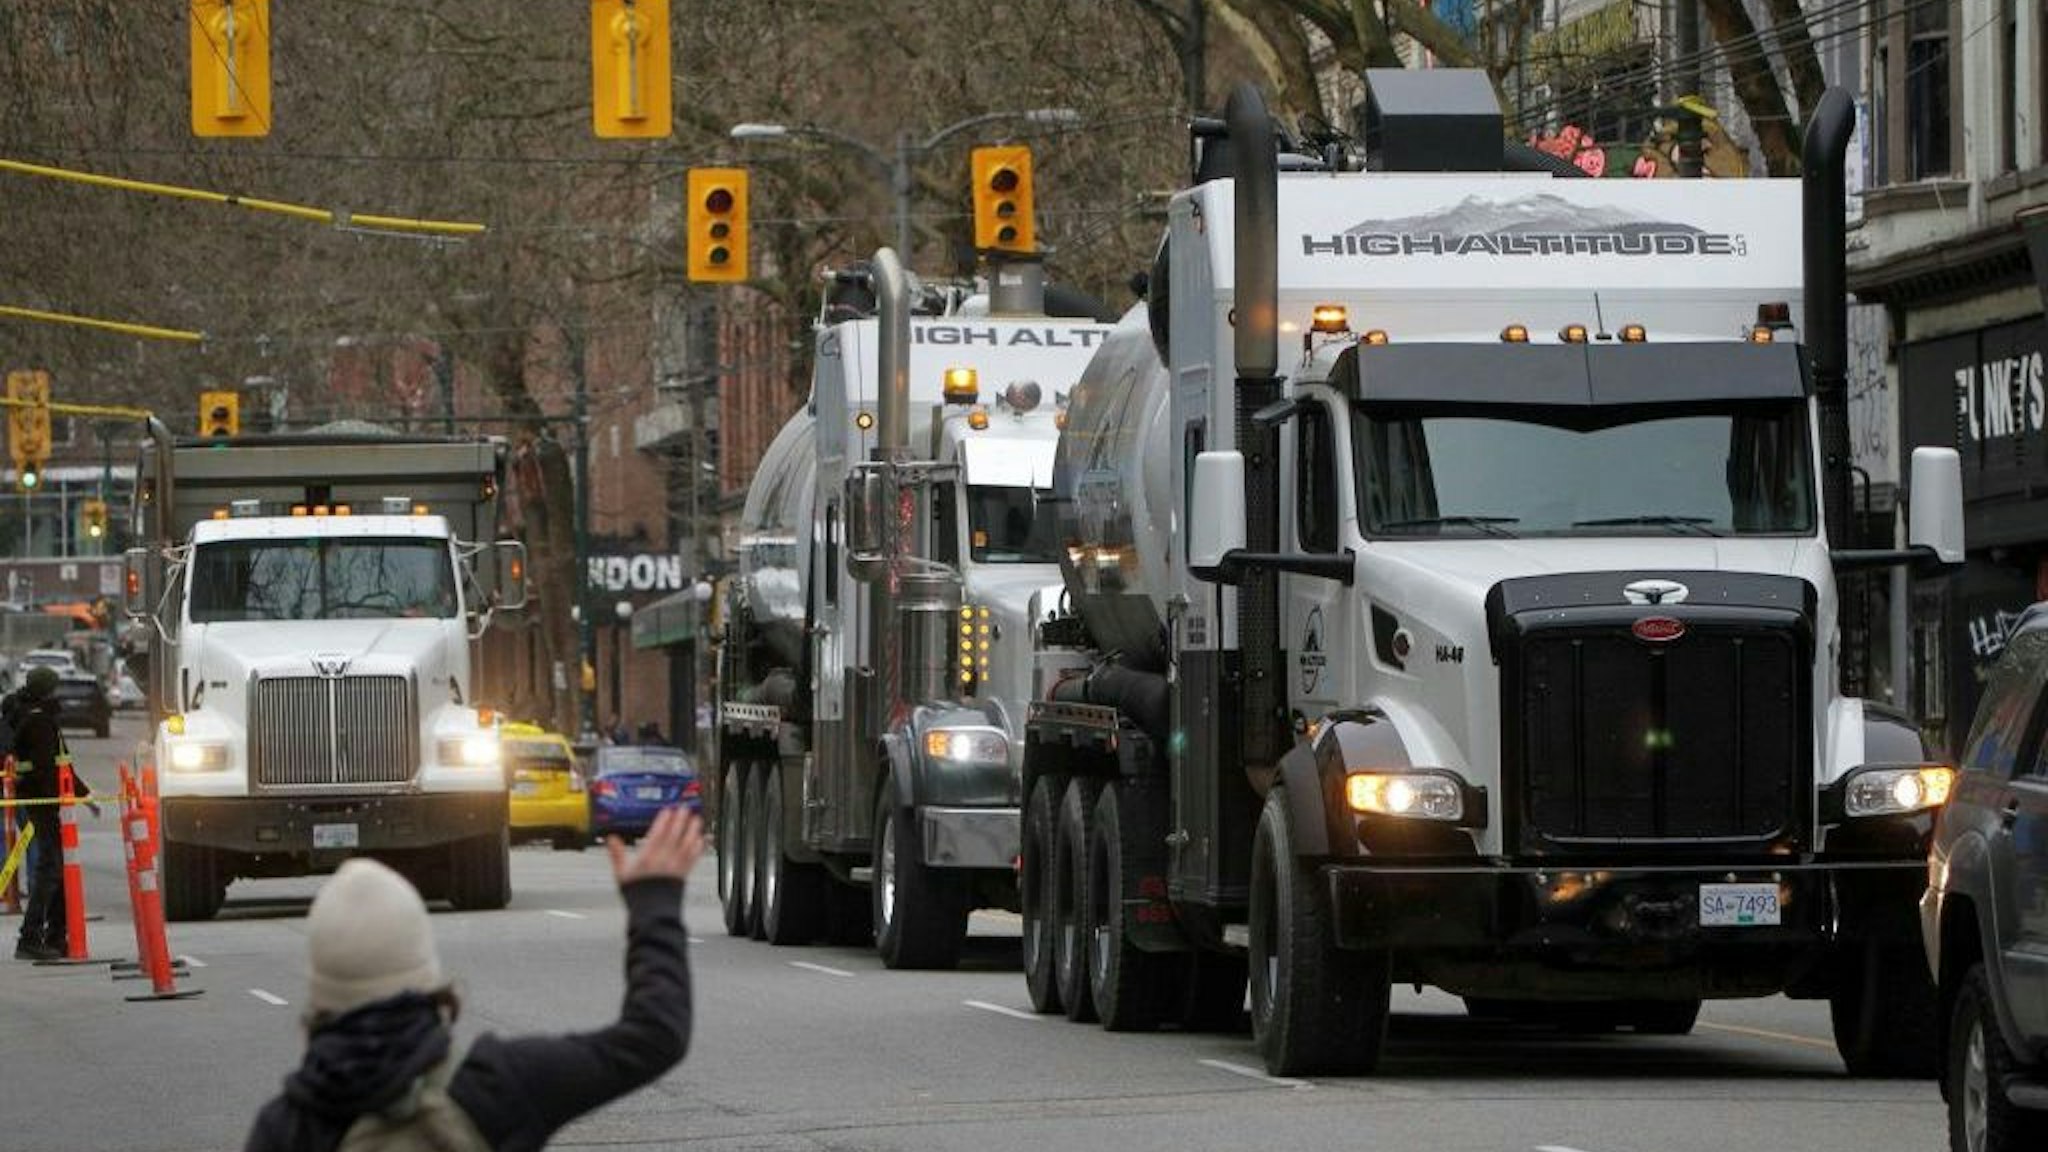 A person gestures to vehicles on the street during a parade in support of Ottawa's "Freedom Convoy" trucker protest in downtown Vancouver, British Columbia, Canada, Jan. 29, 2022. Vehicles jammed downtown Vancouver streets Saturday to show their support of the "Freedom Convoy" of long-haul drivers to oppose the Canadian government's requirement that all cross-border essential workers, including truckers, must show proof of vaccination at a port of entry. (Photo by Liang Sen/Xinhua via Getty Images)